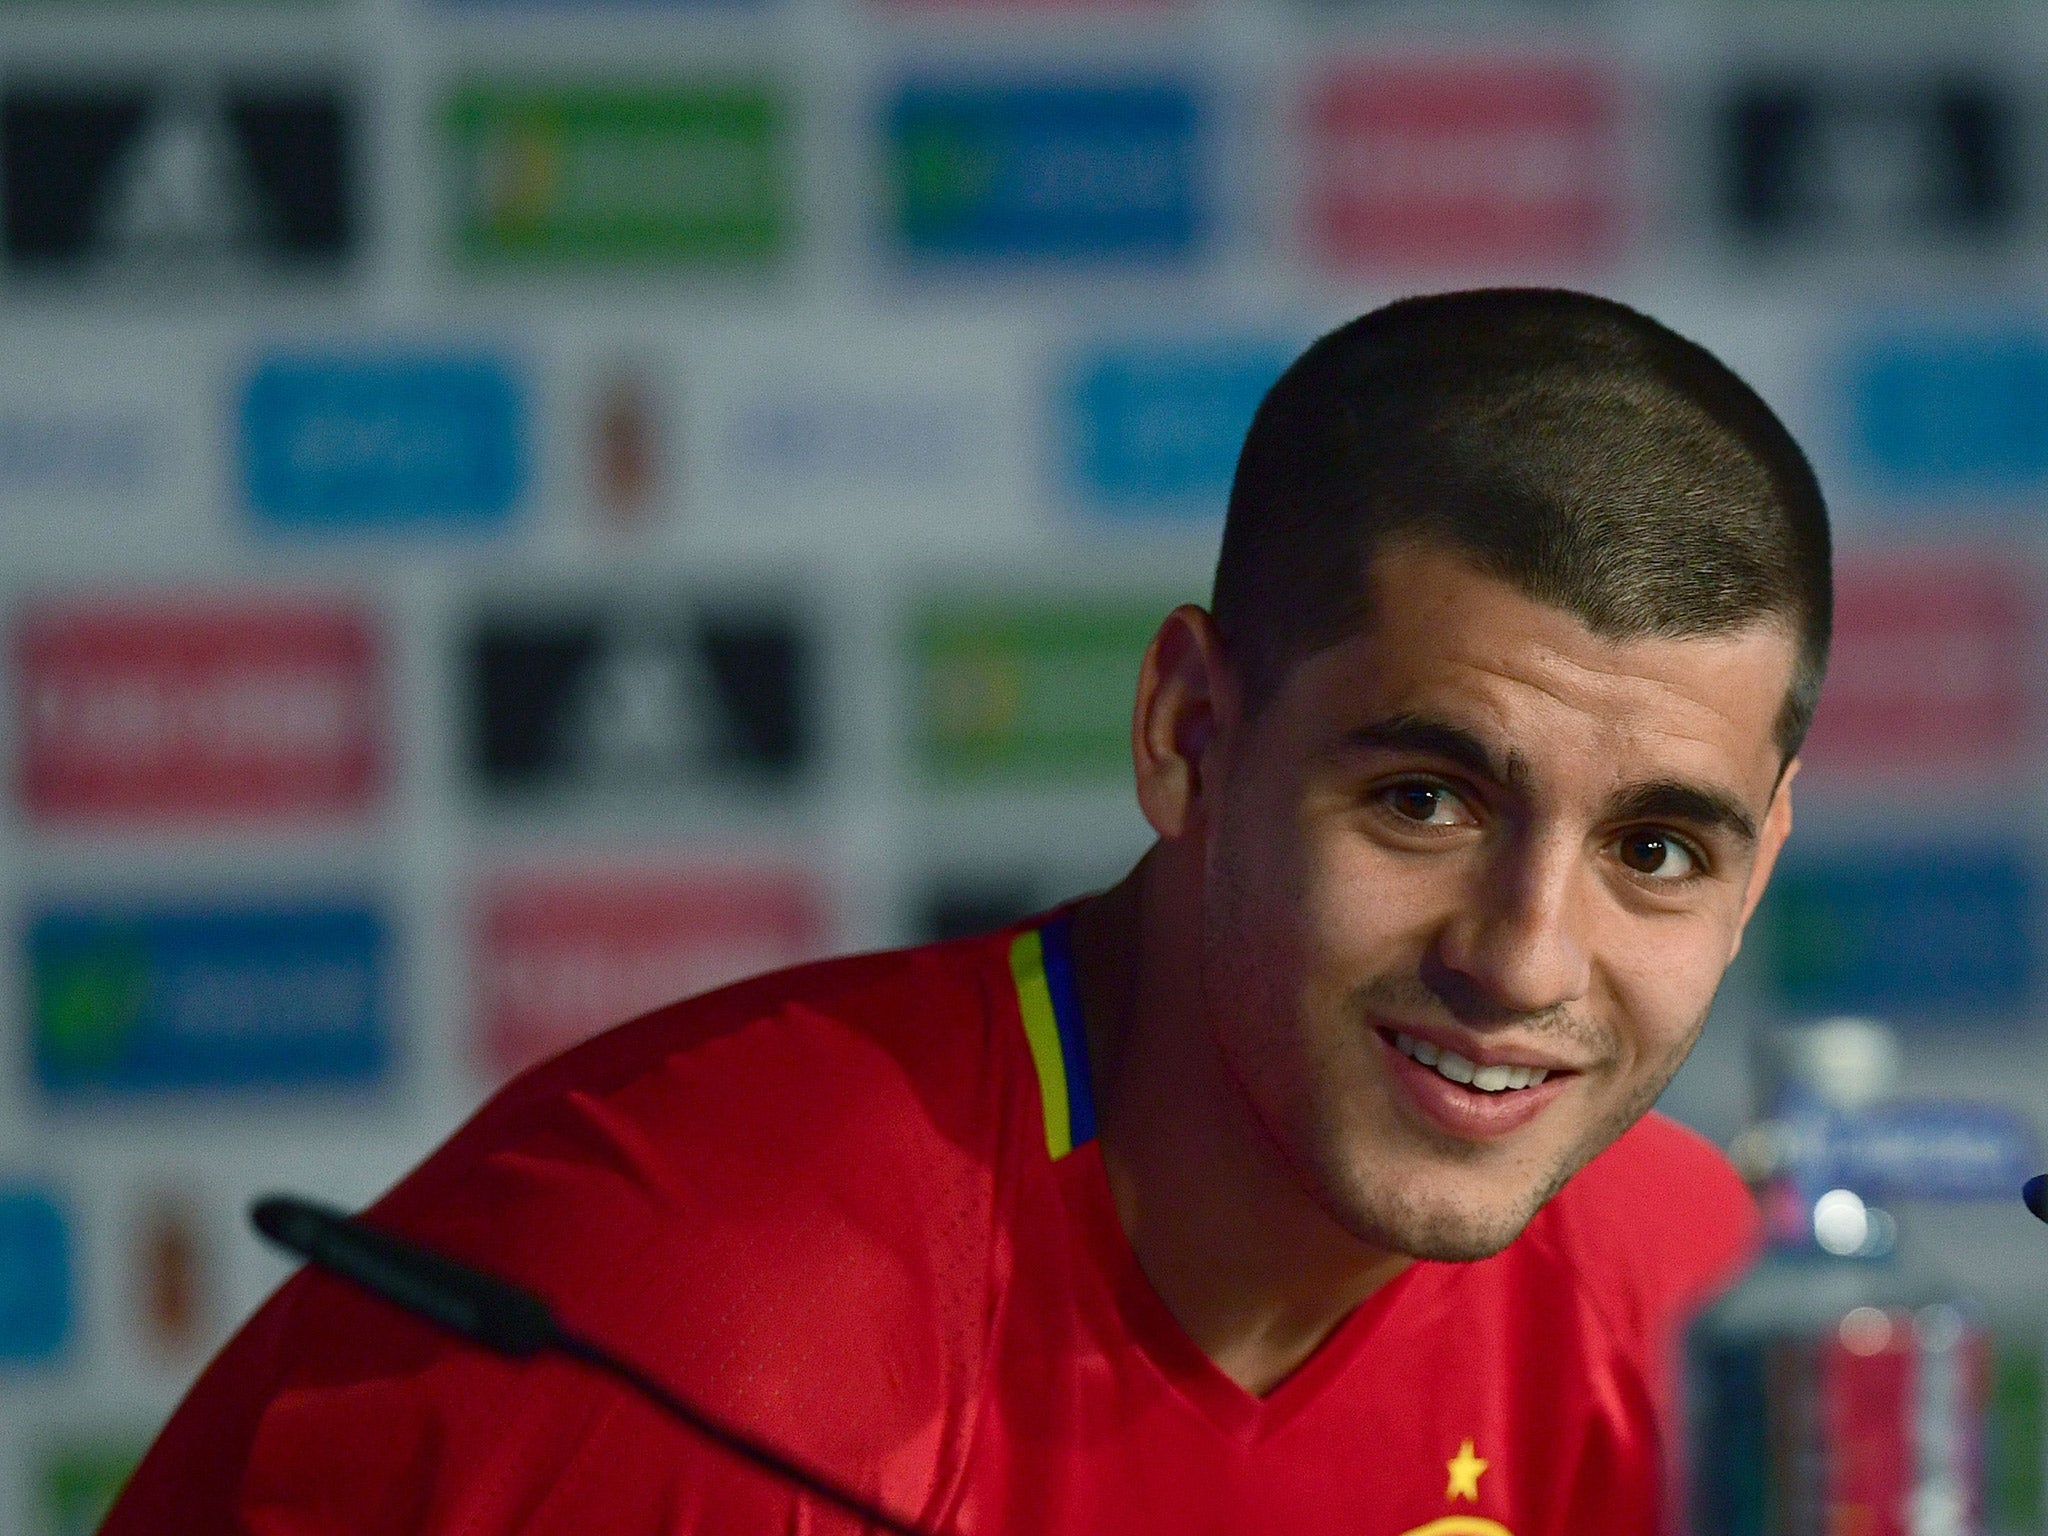 Spain striker Alvaro Morata is said to favour a move to Manchester United or Chelsea